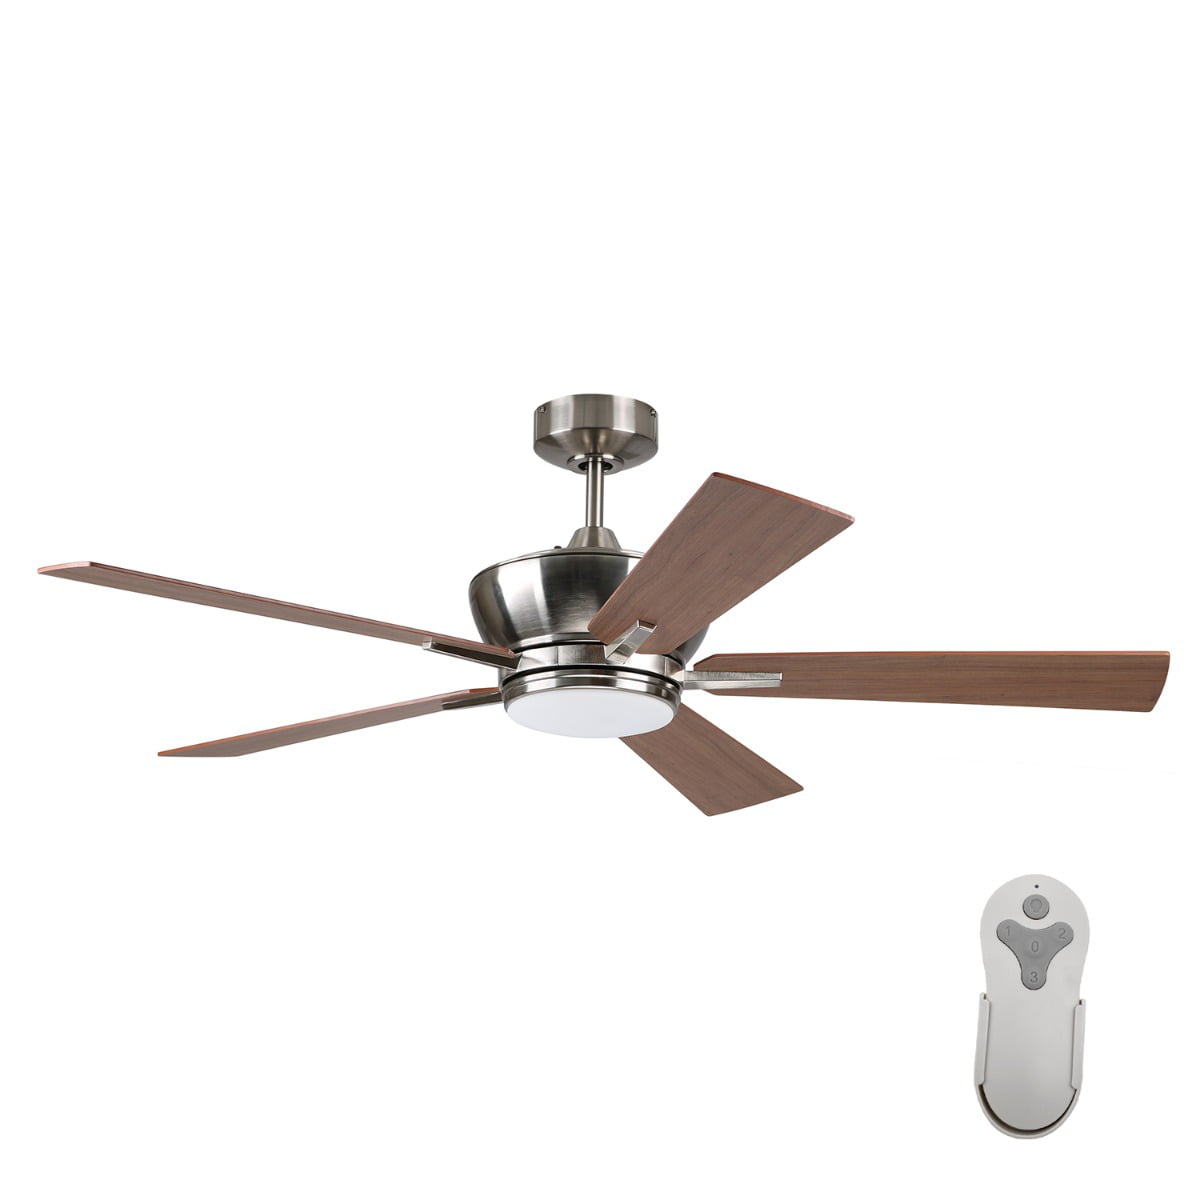 Bronze finish 52" 56'' Indoor Ceiling Fan with LED Light Remote Control Nickel 